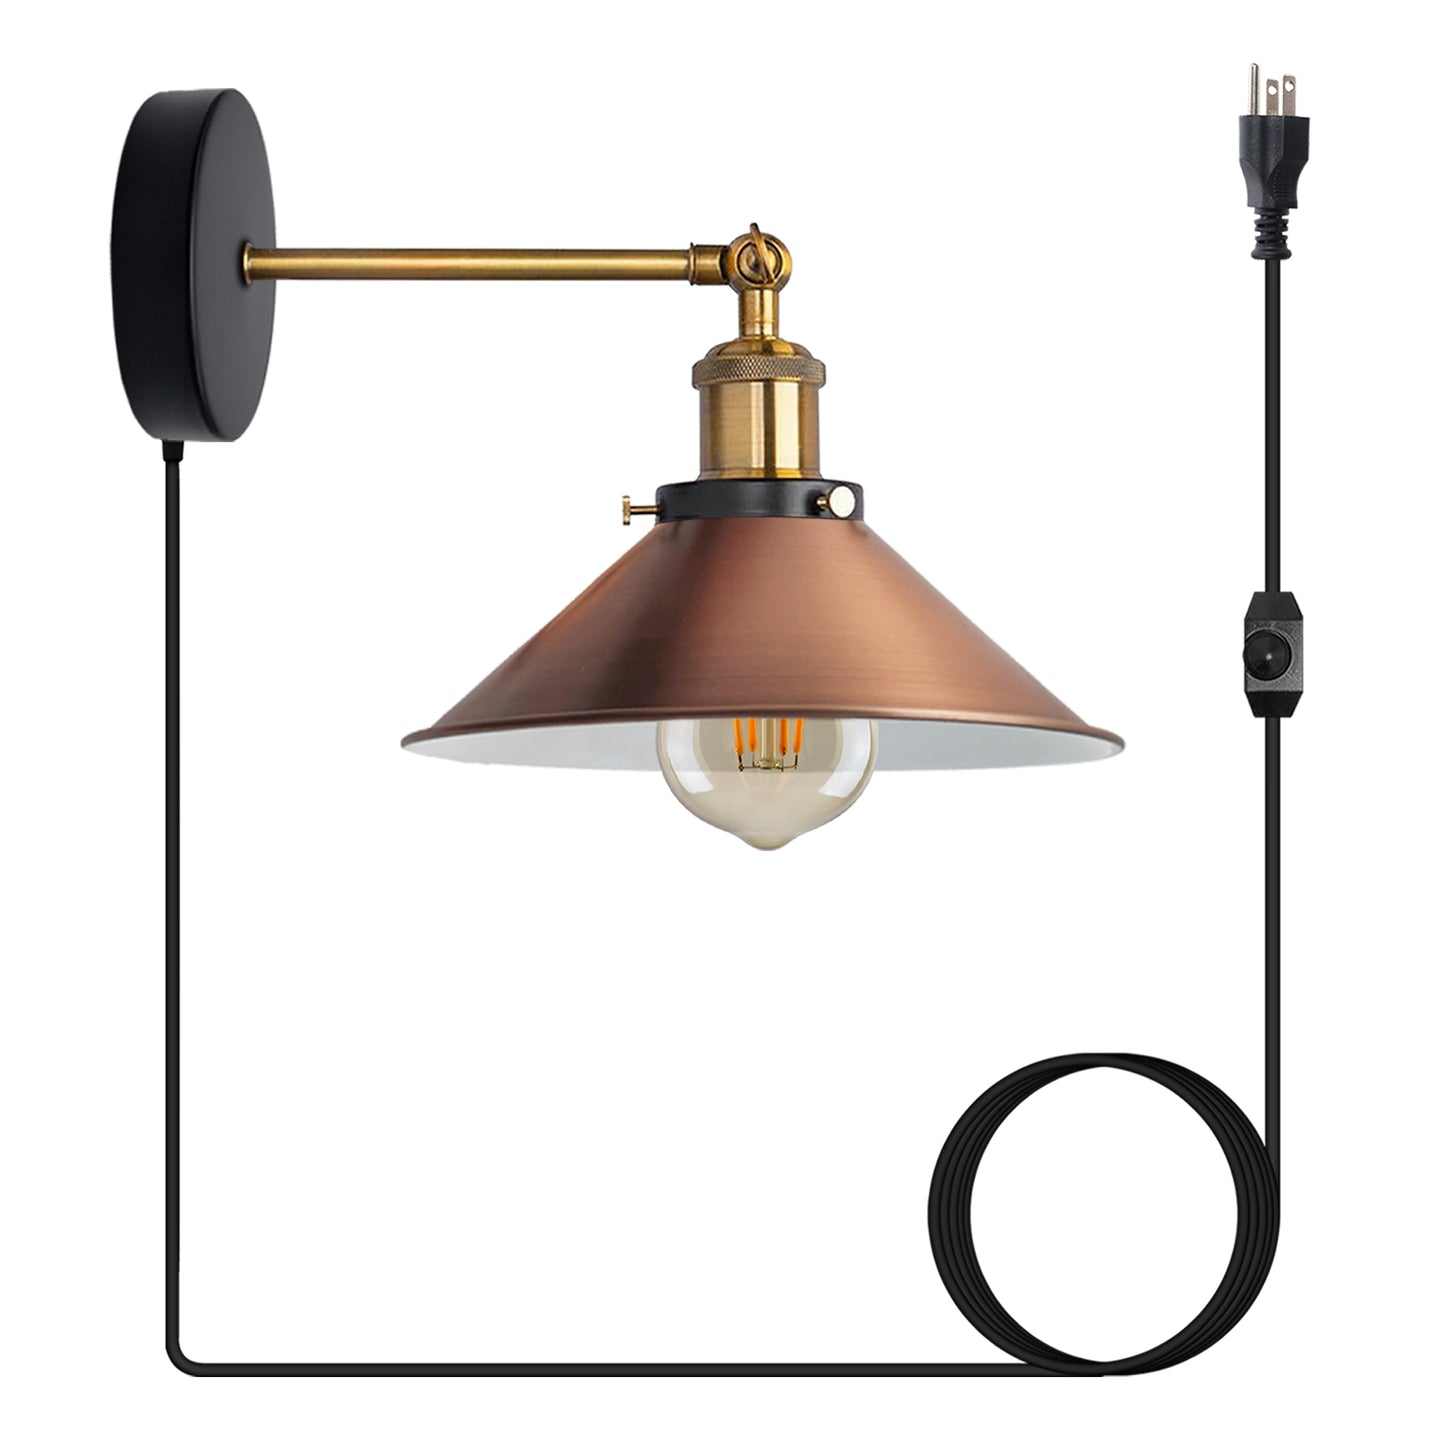 Copper plug in wall light with dimmer switch.JPG